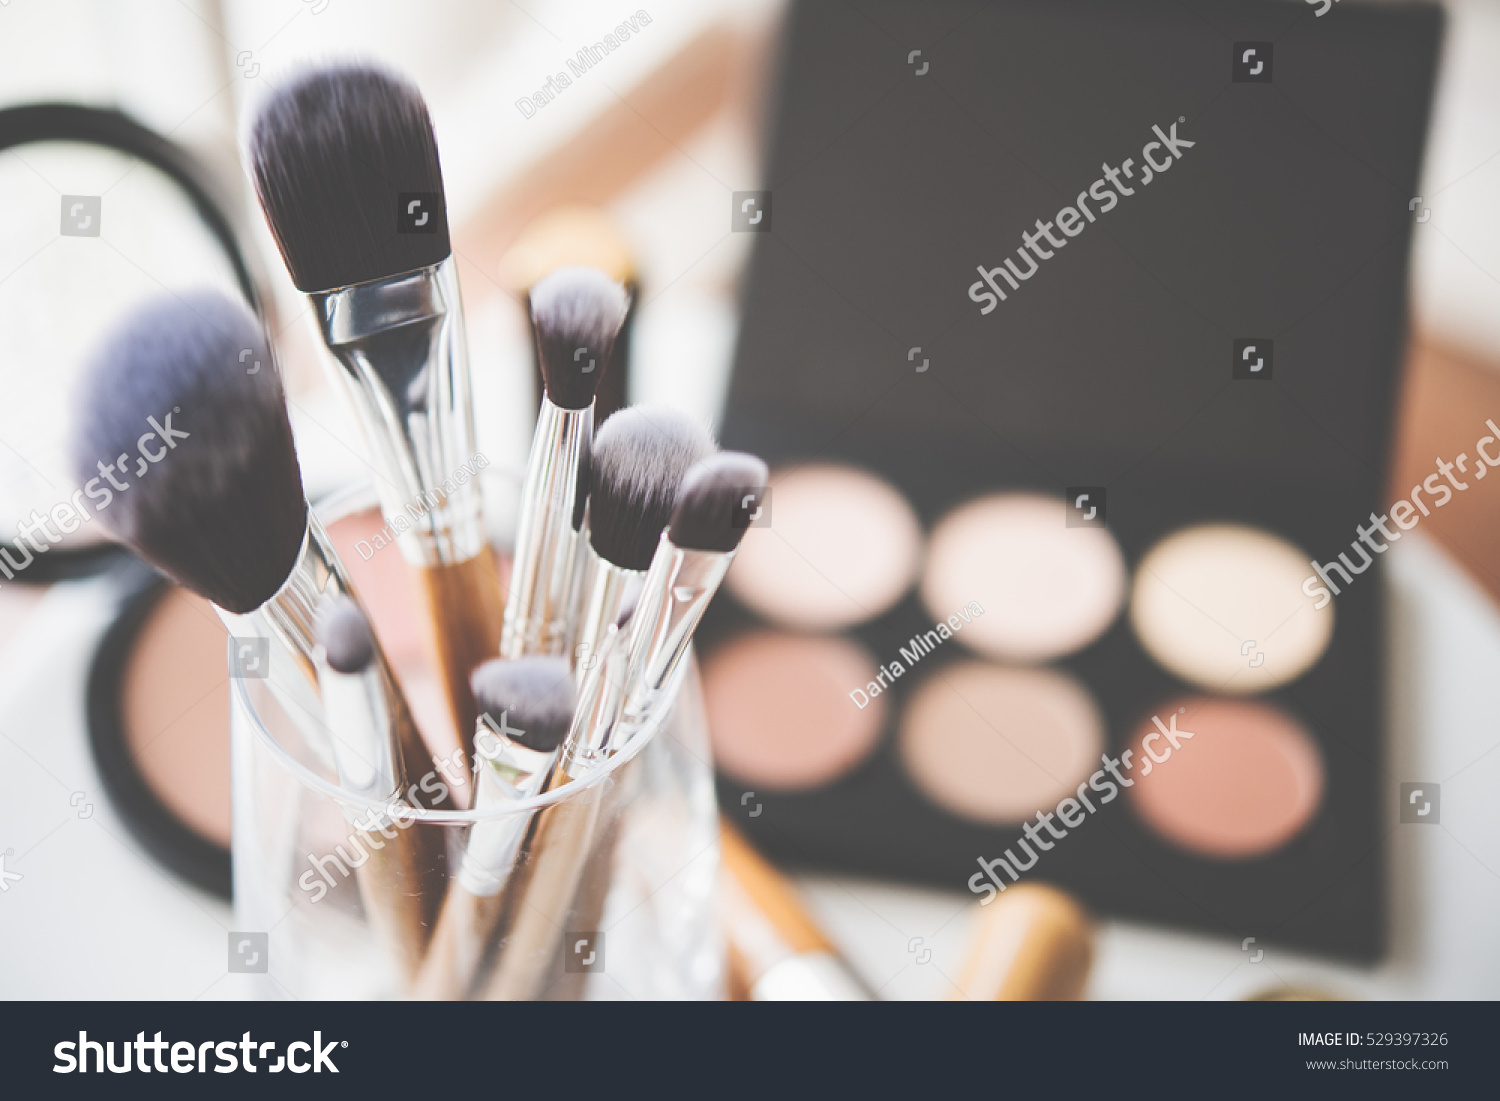 Professional makeup brushes and tools #529397326